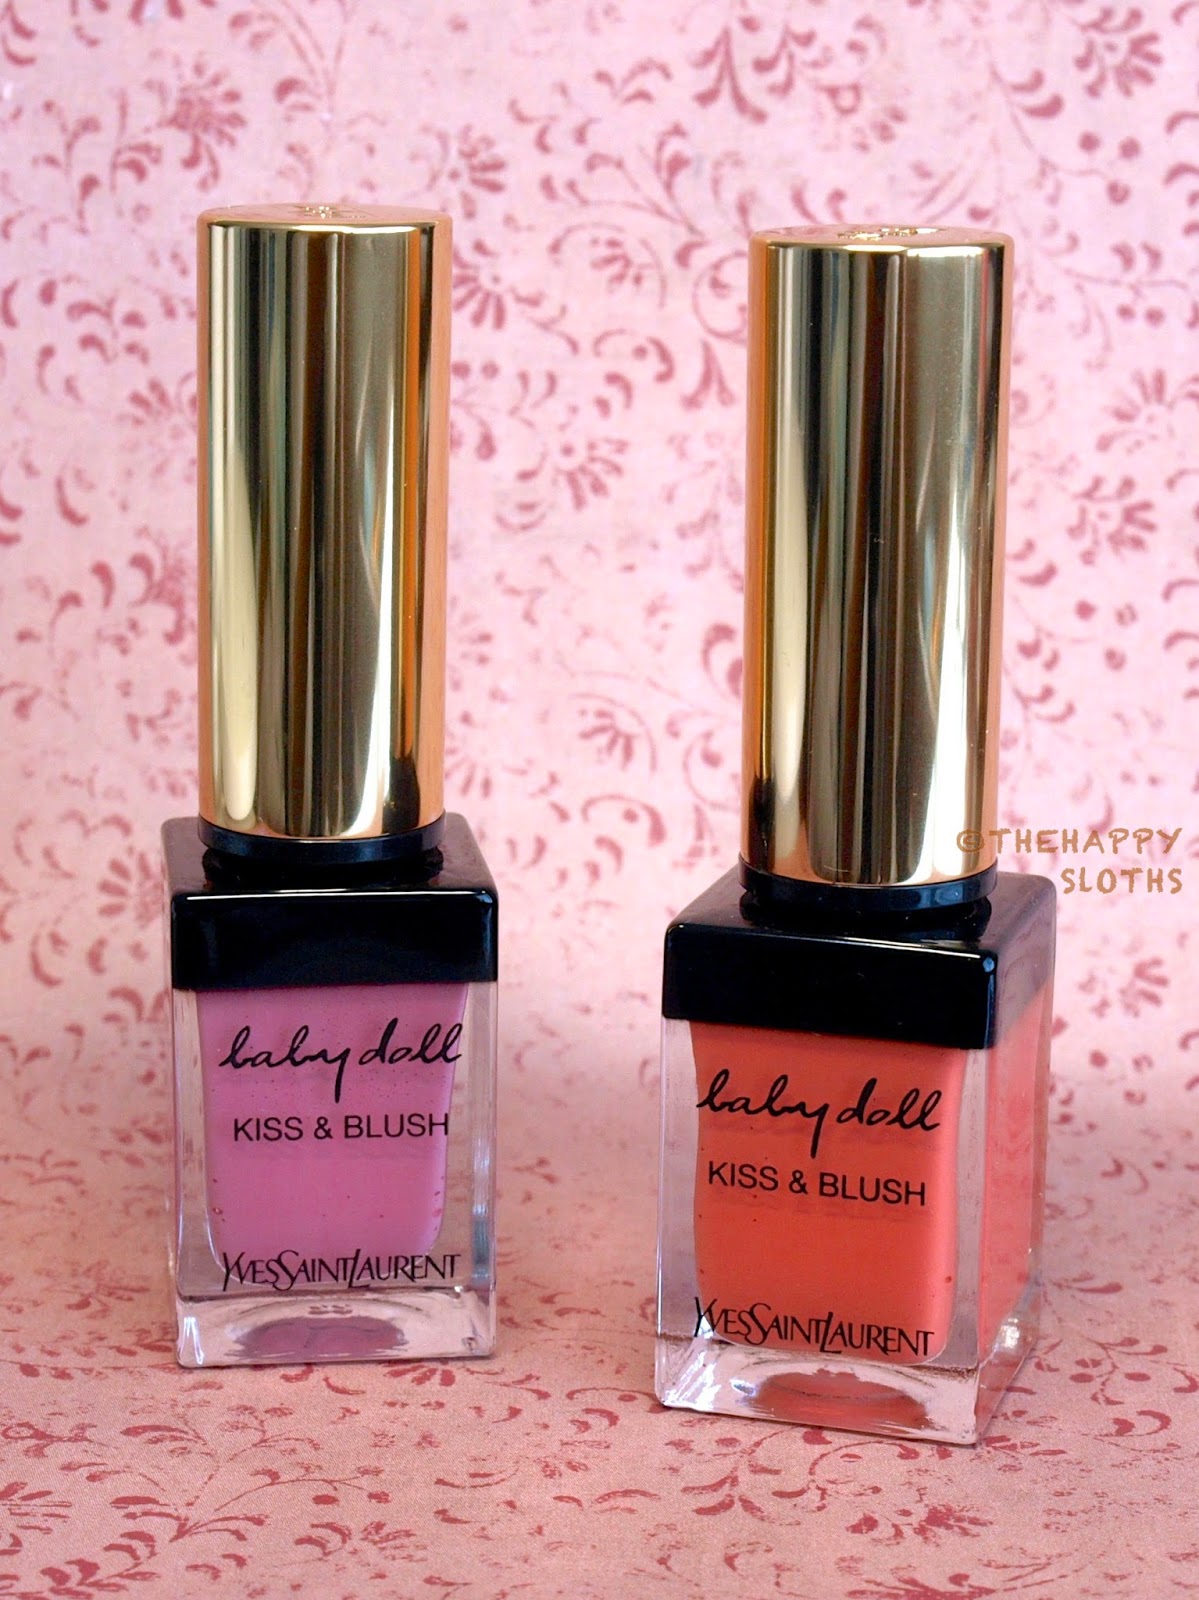 YSL Baby Doll Kiss & Blush Lips & Cheeks: Review and Swatches | The